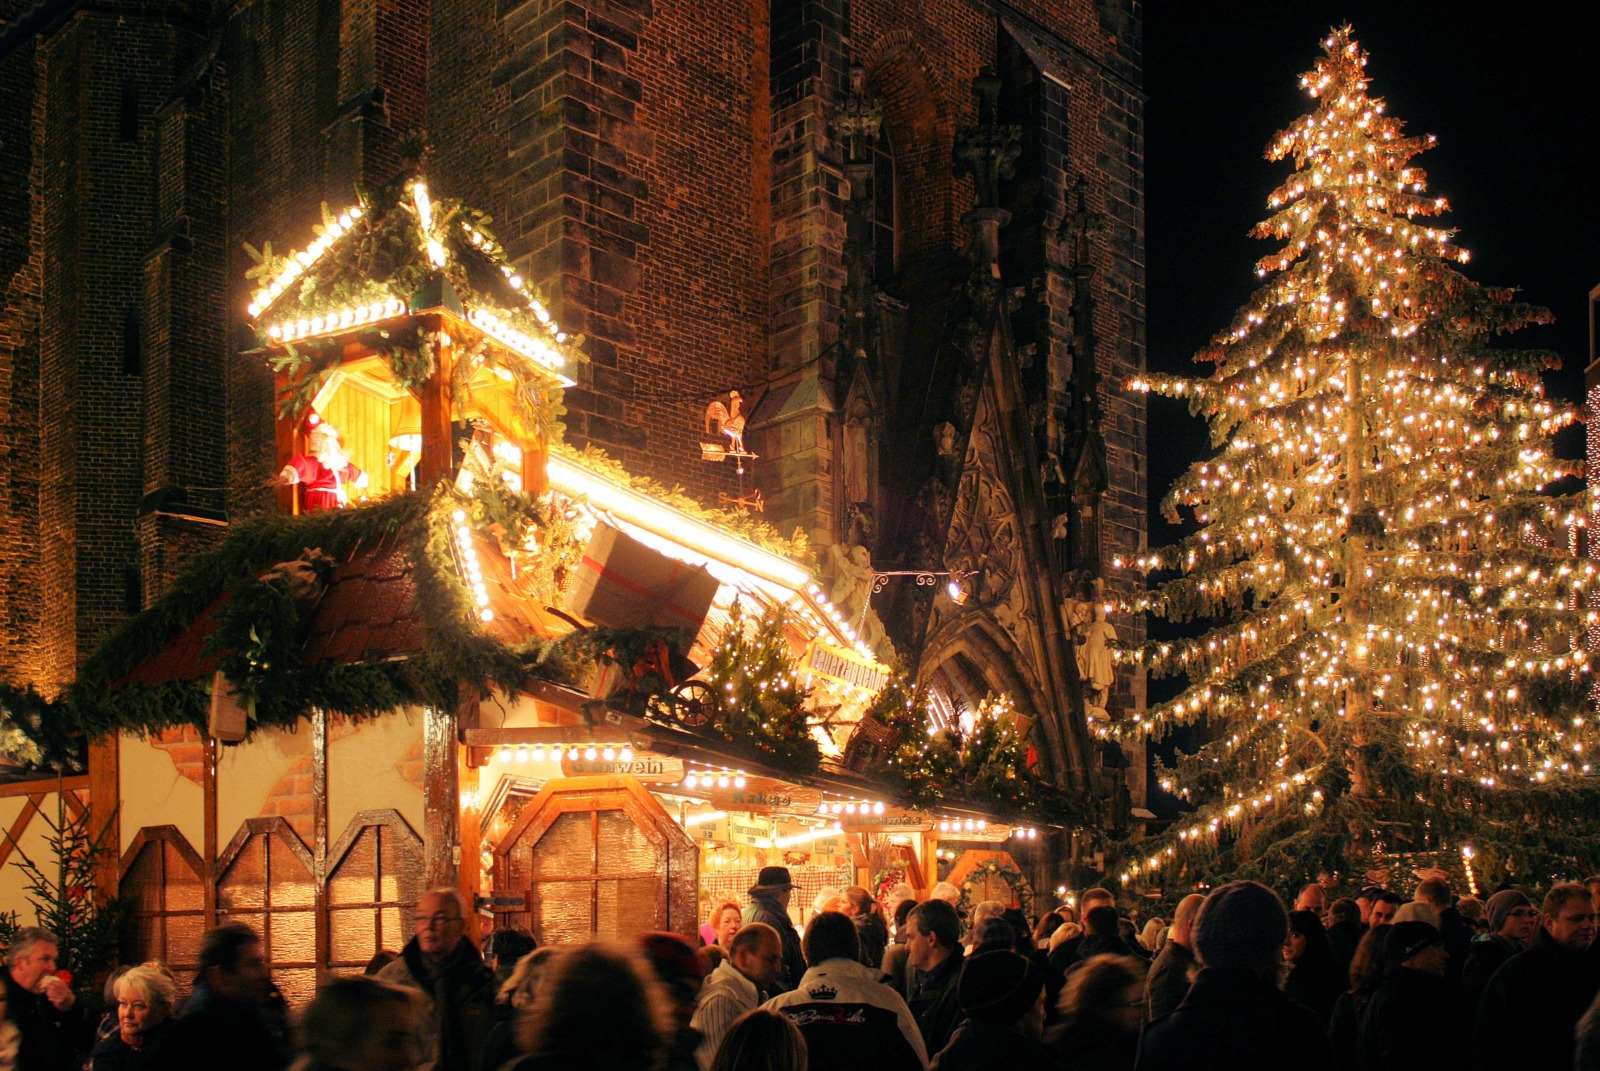 Christmas Markets in Germany - Hannover Weihnachtsmarkt © Dguendel - licence [CC BY 4.0] from Wikimedia Commons